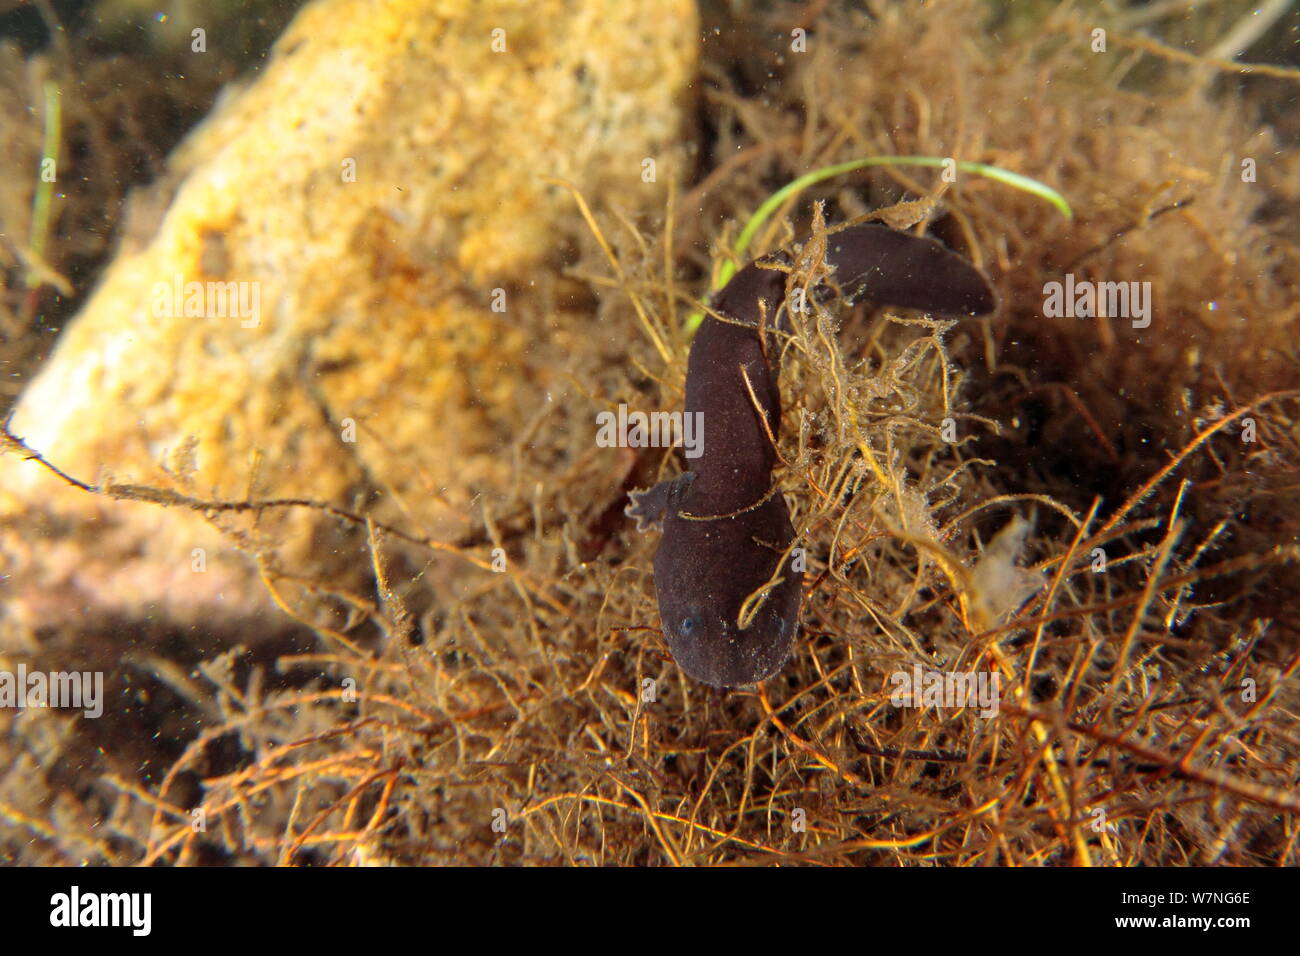 Japanese giant salamander (Andrias japonicus) hatchlings at entrance to nest, holding on to aquatic plants so as not to be swept away in the current, Japan, March Stock Photo